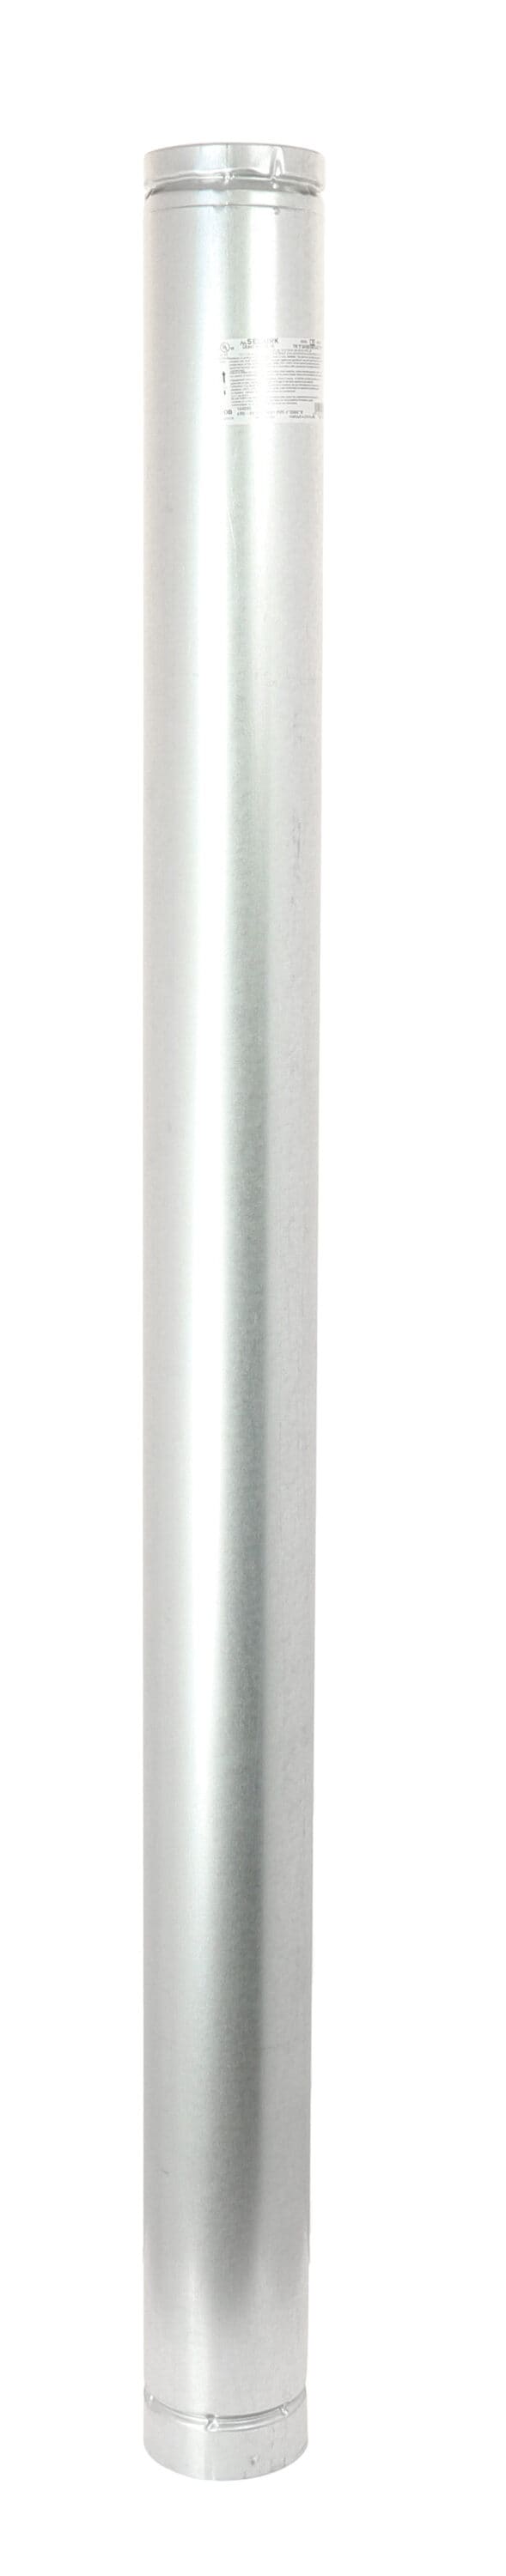 10 X 24 Galvanized Stove Pipe (26 Gauge) - (Available For Local Pick Up  Only) - Greschlers Hardware